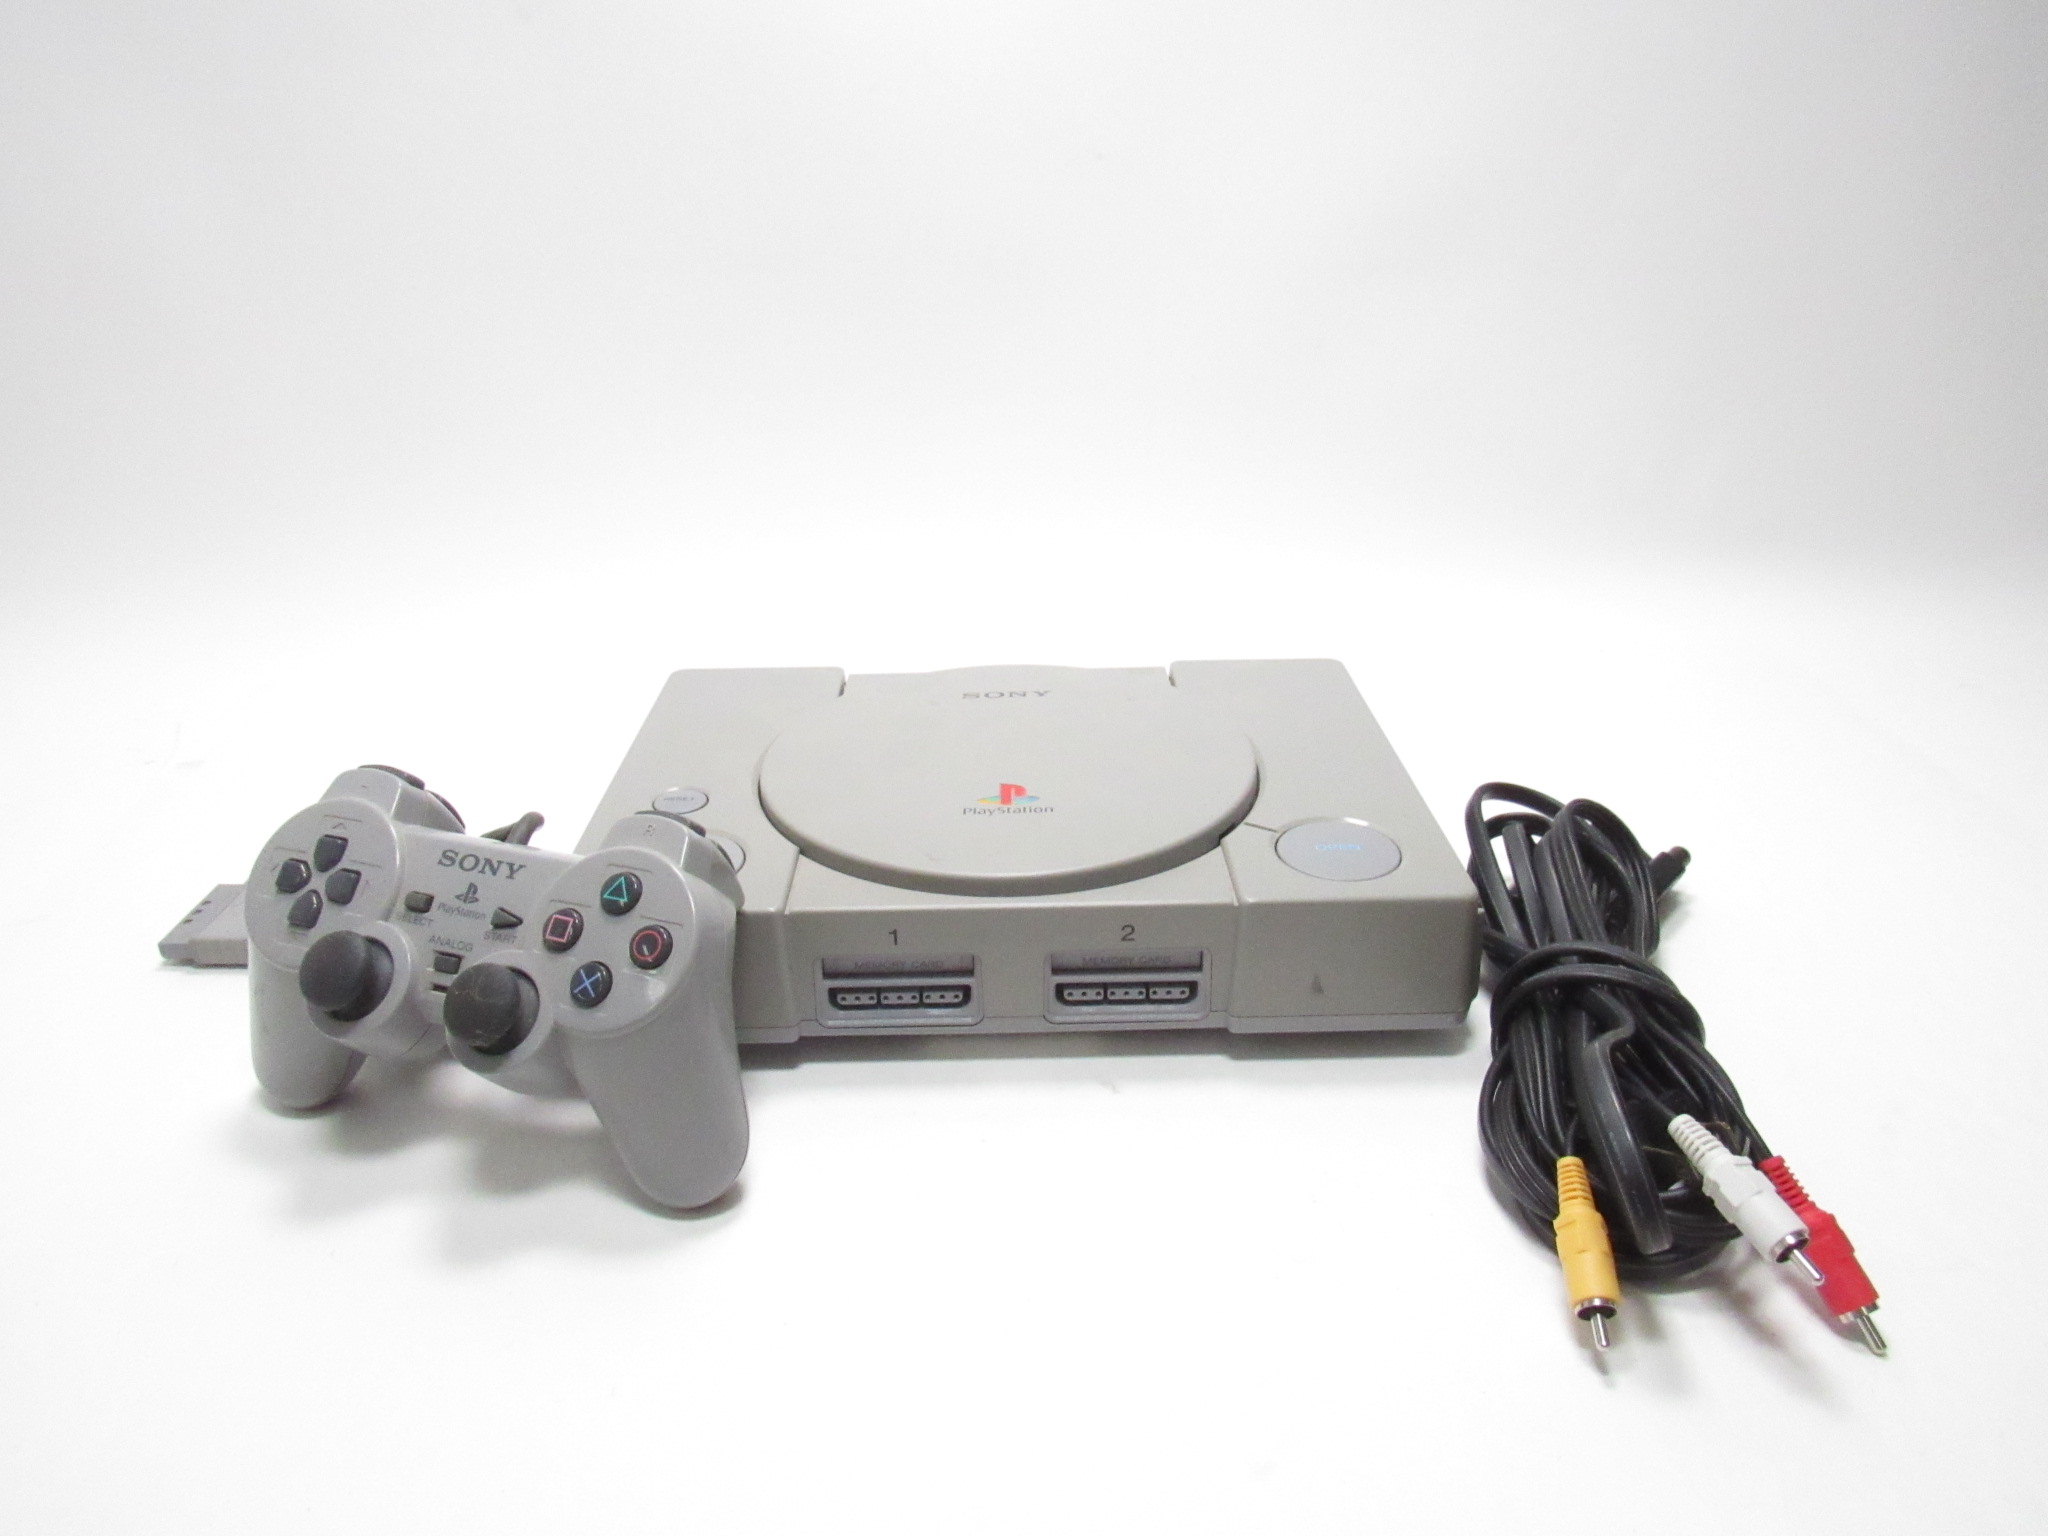 Playstation 1 Video Game Consoles for sale in Chicago, Illinois